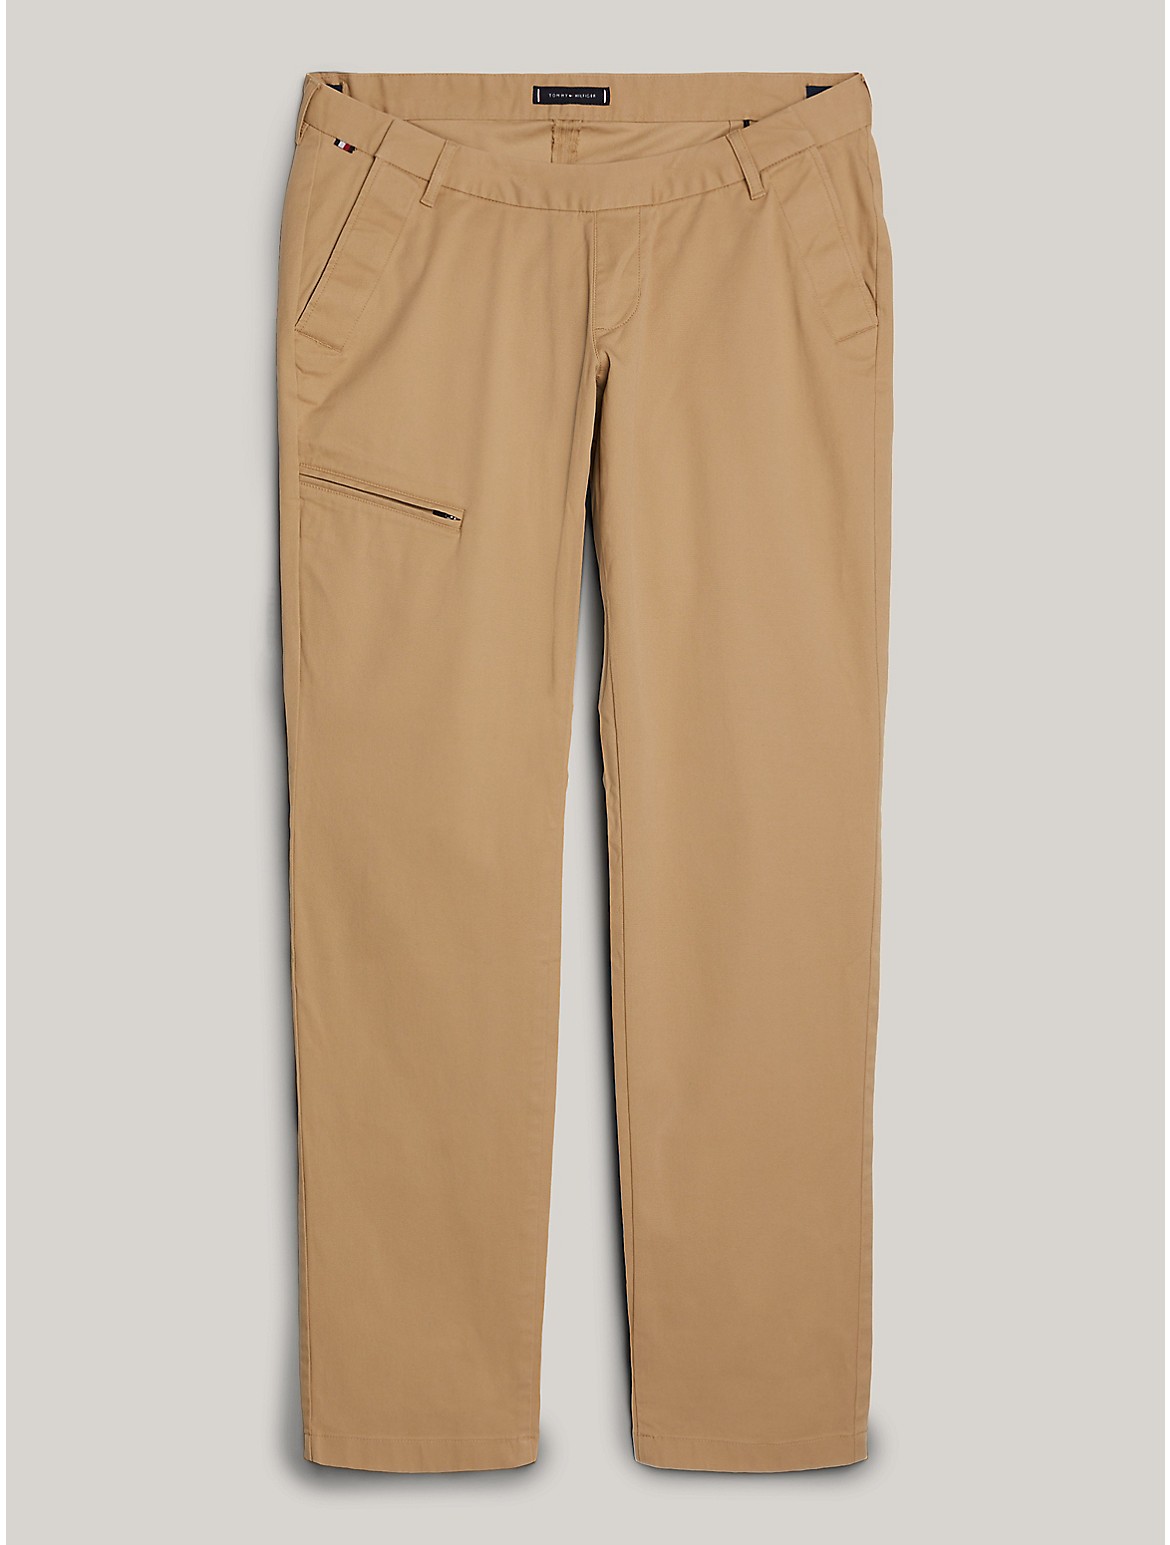 Tommy Hilfiger Men's Straight Fit 1985 Chino